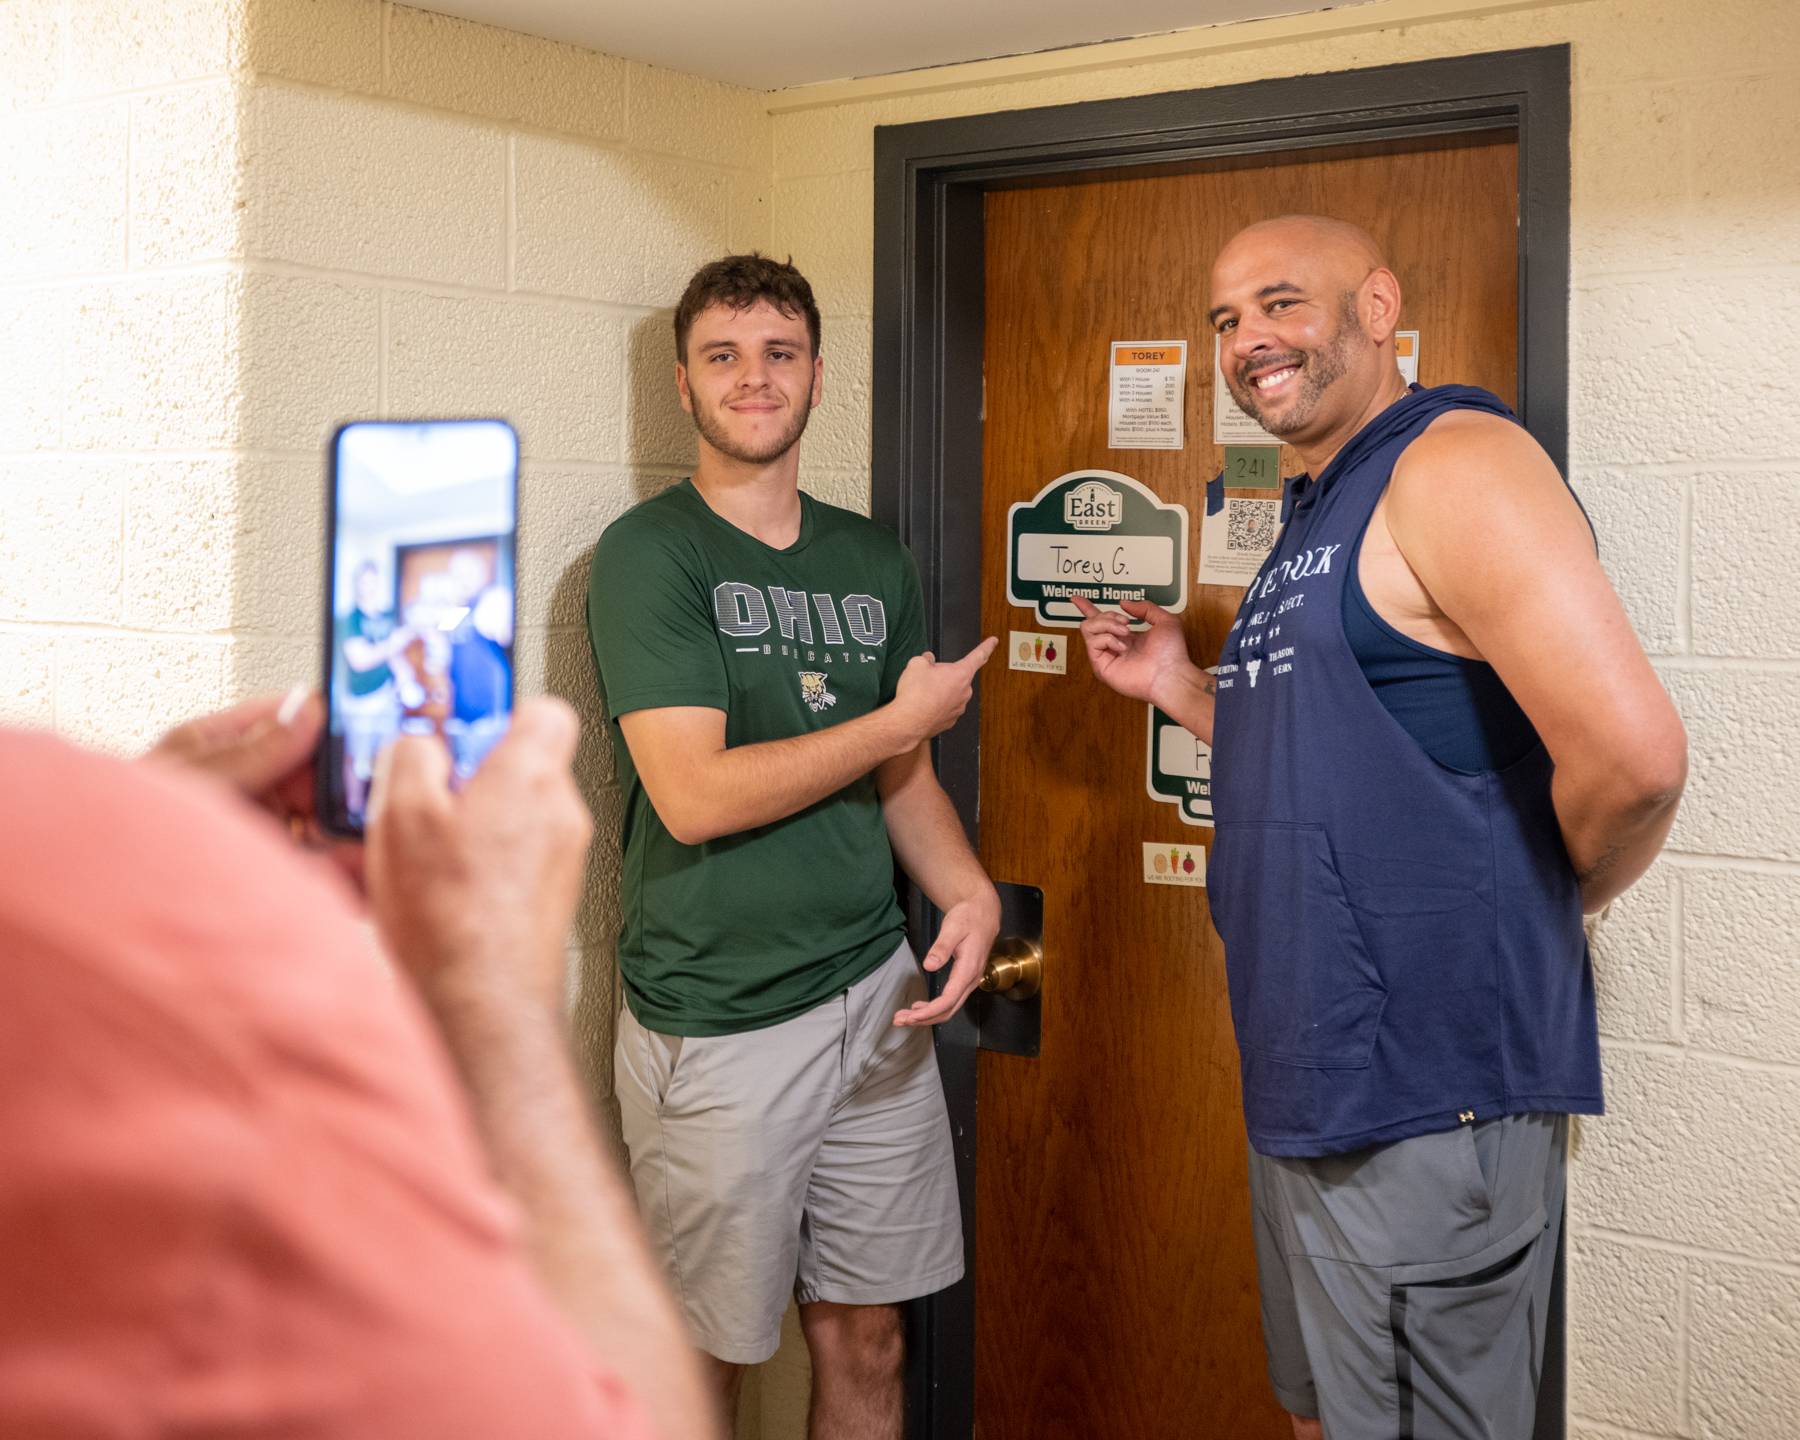 A first-year student poses for a photo just outside his new residence hall room on East Green